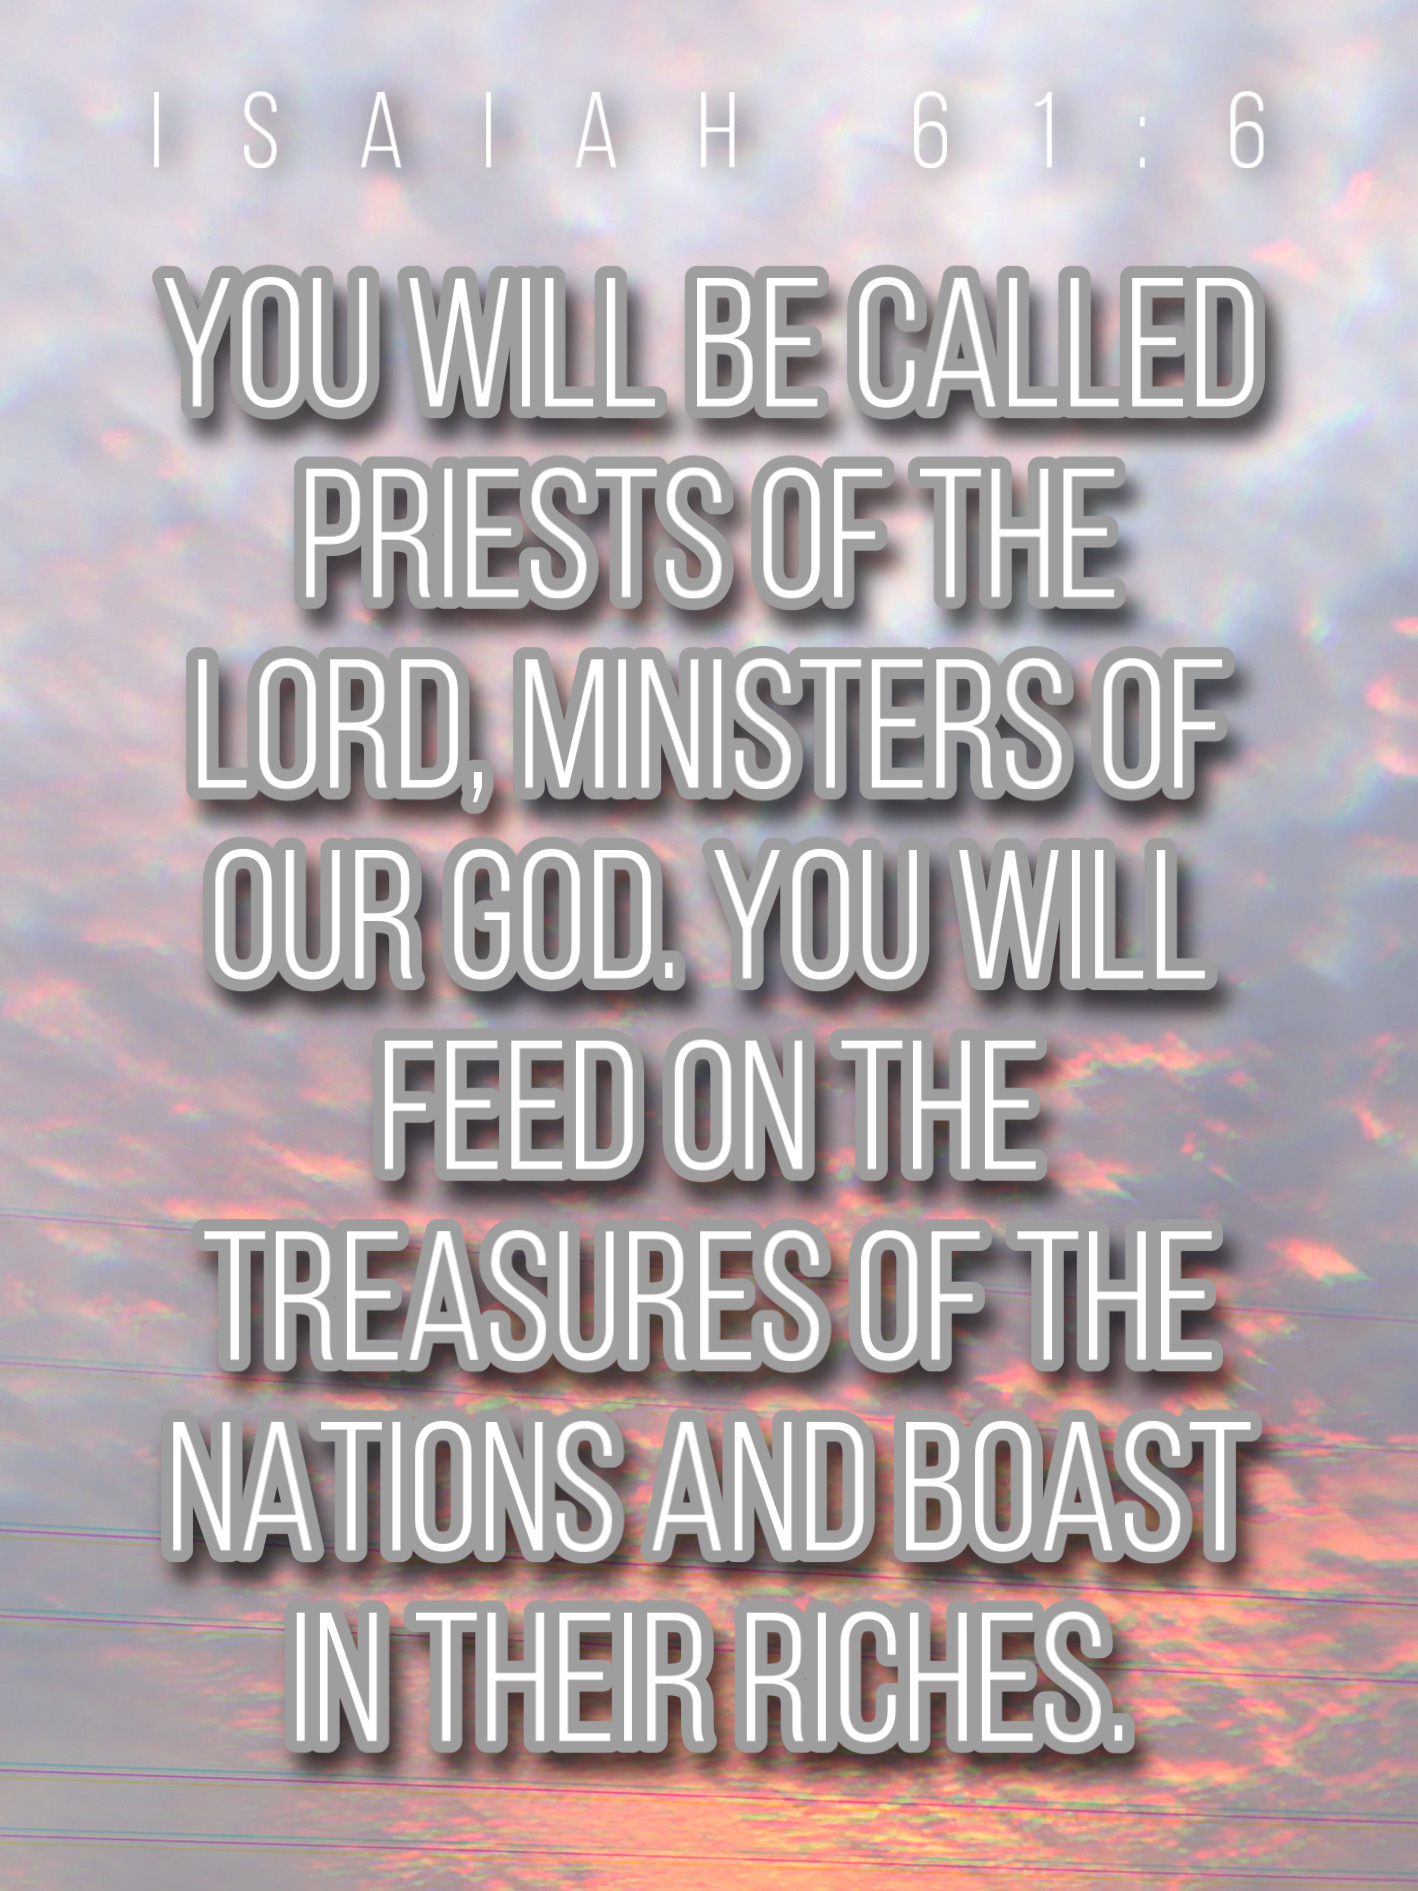 For All The Ministers Minister You Will Be Called Priests Of The Lord